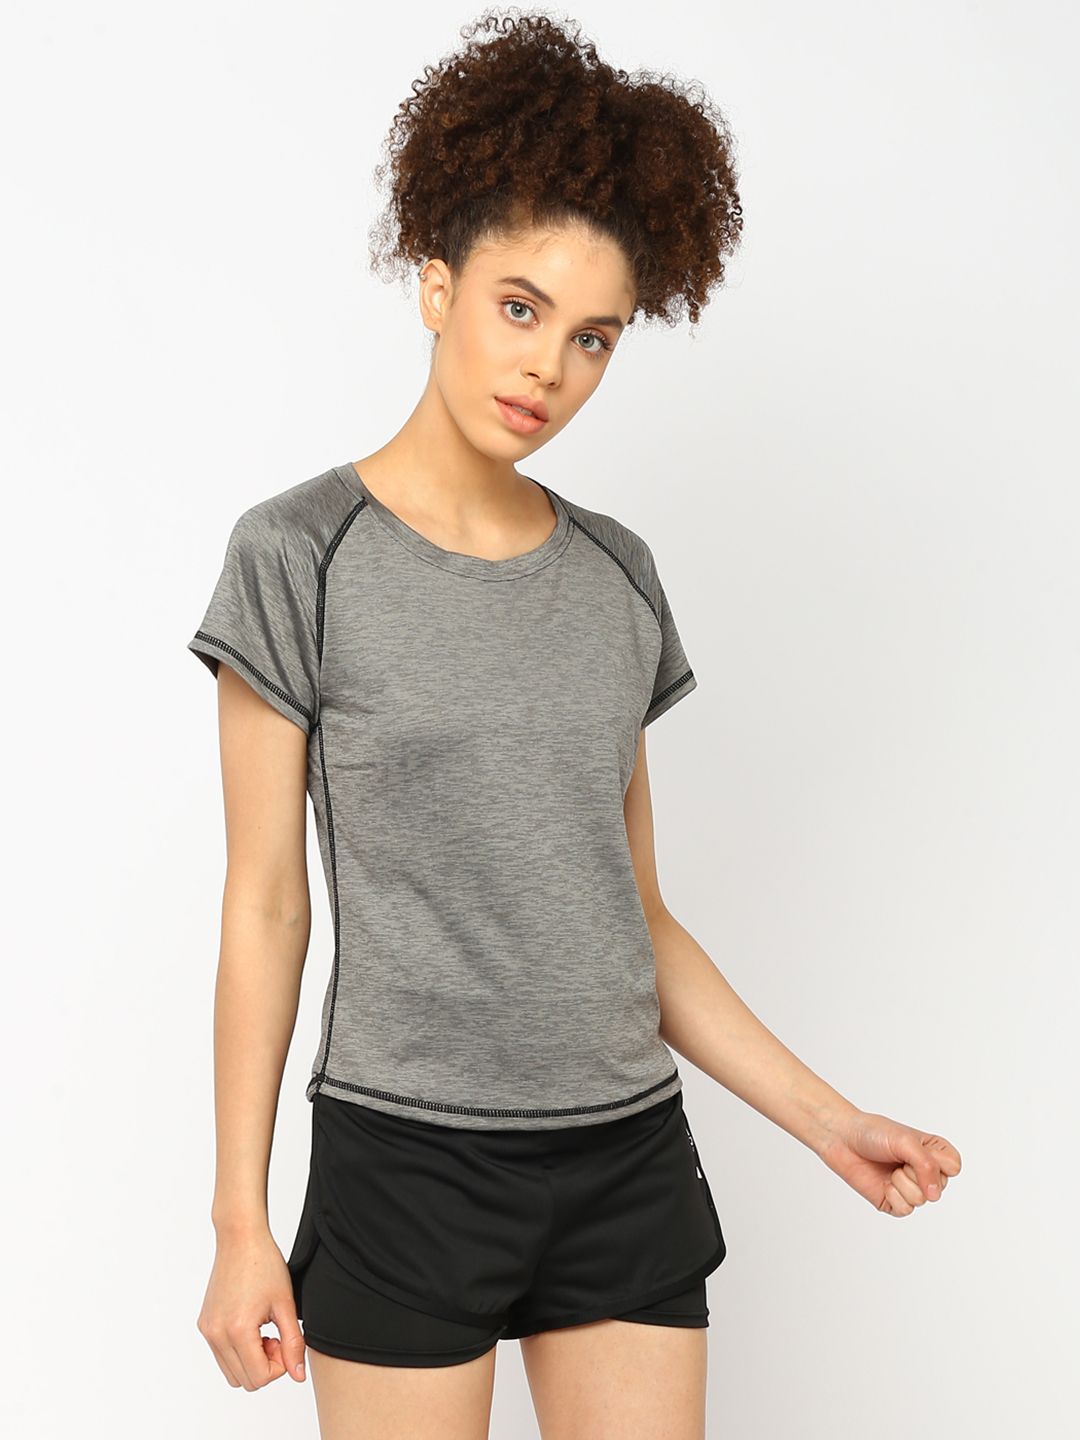 JerfSports Women Grey Melange & Black Solid T-Shirt with Shorts Price in India